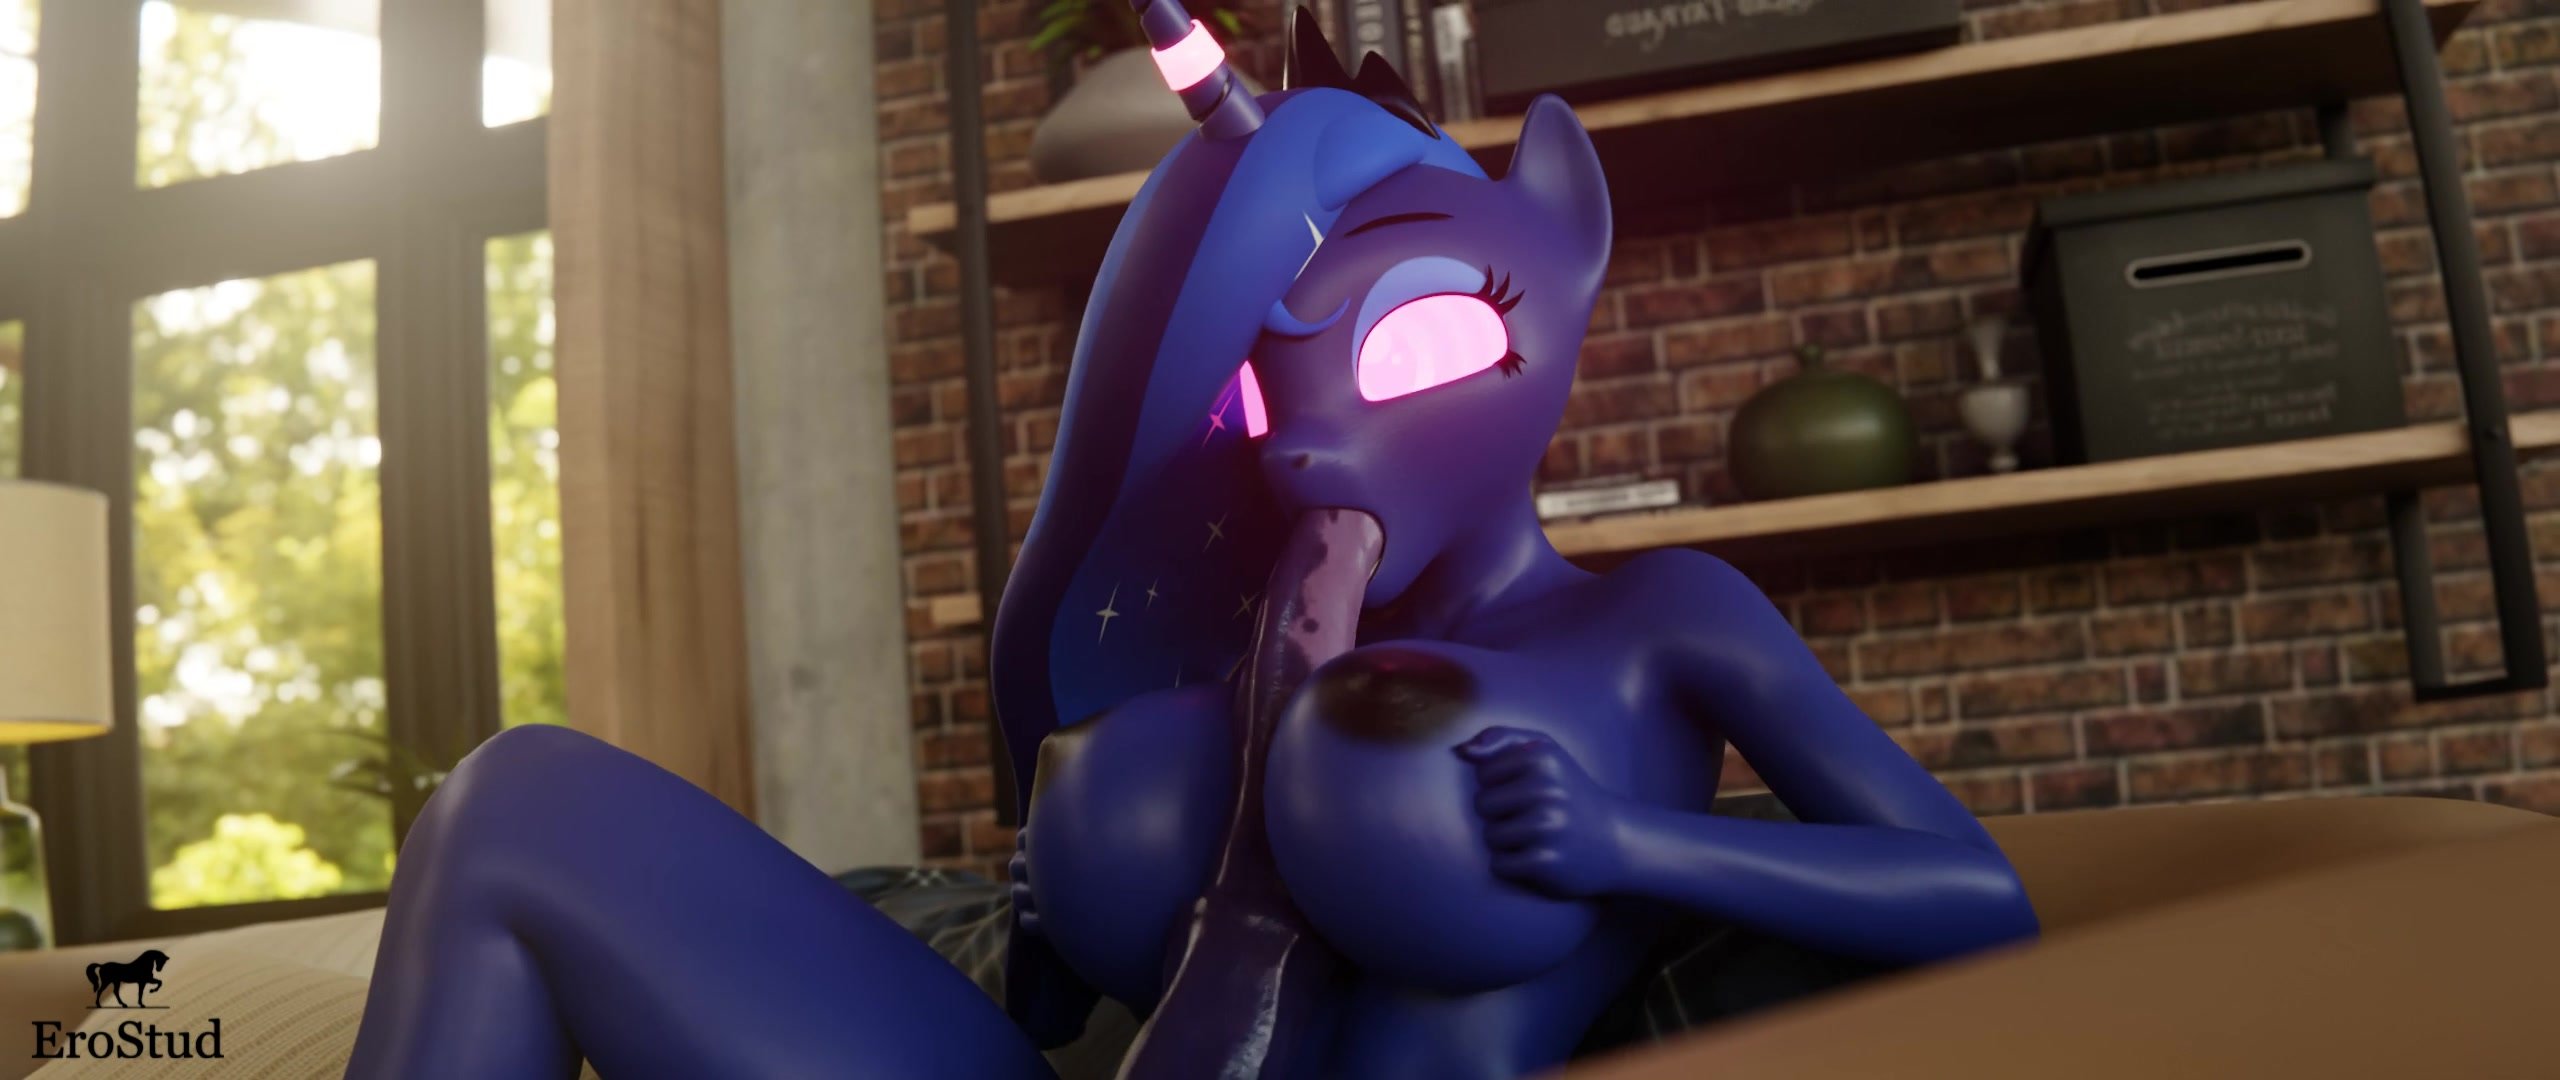 Possessed Luna gives a blowjob by epickitty